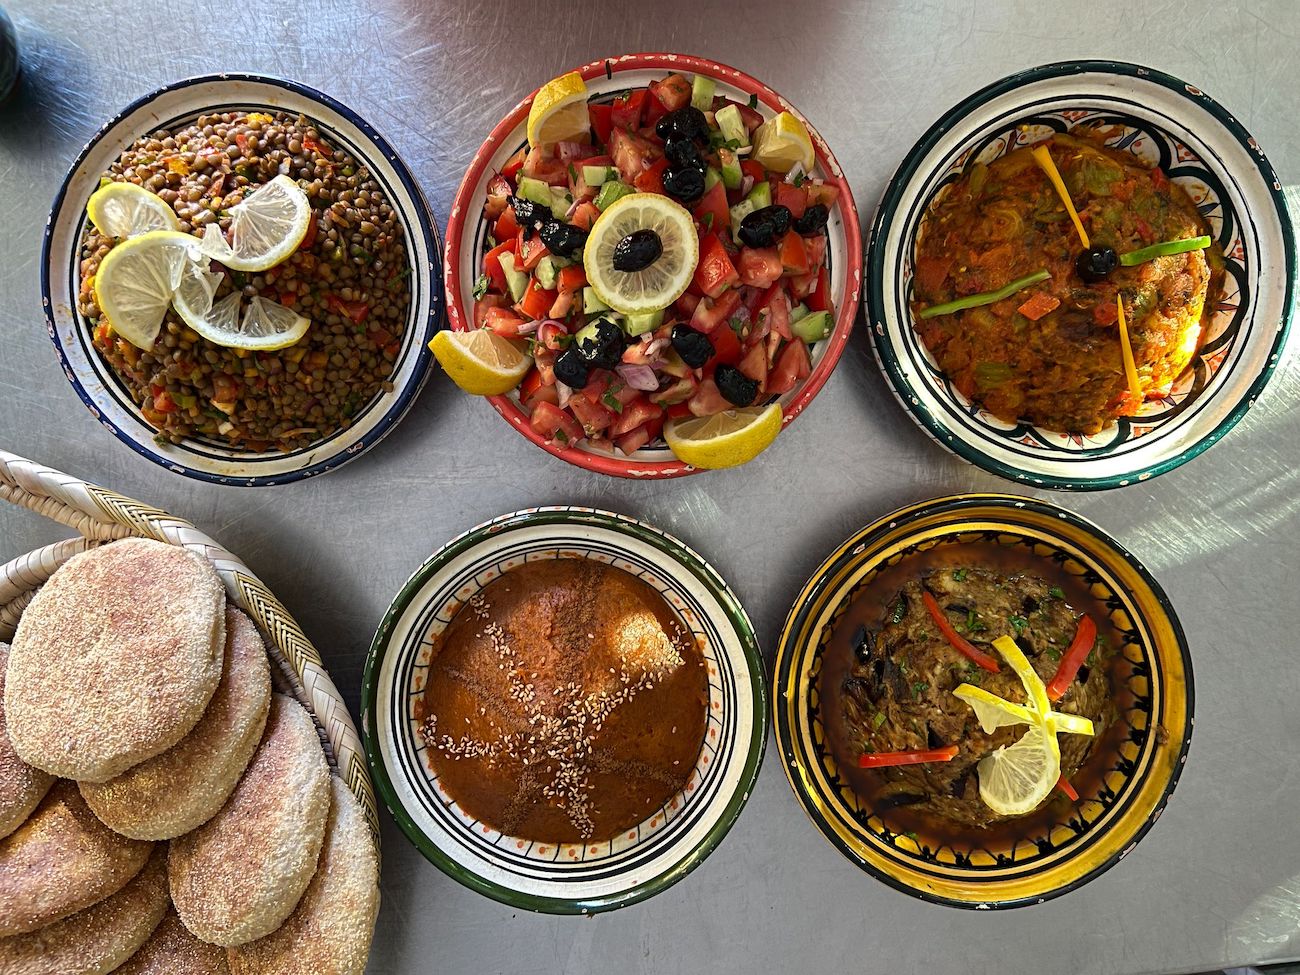 A variety of vegetarian dishes at a Moroccan cooking school